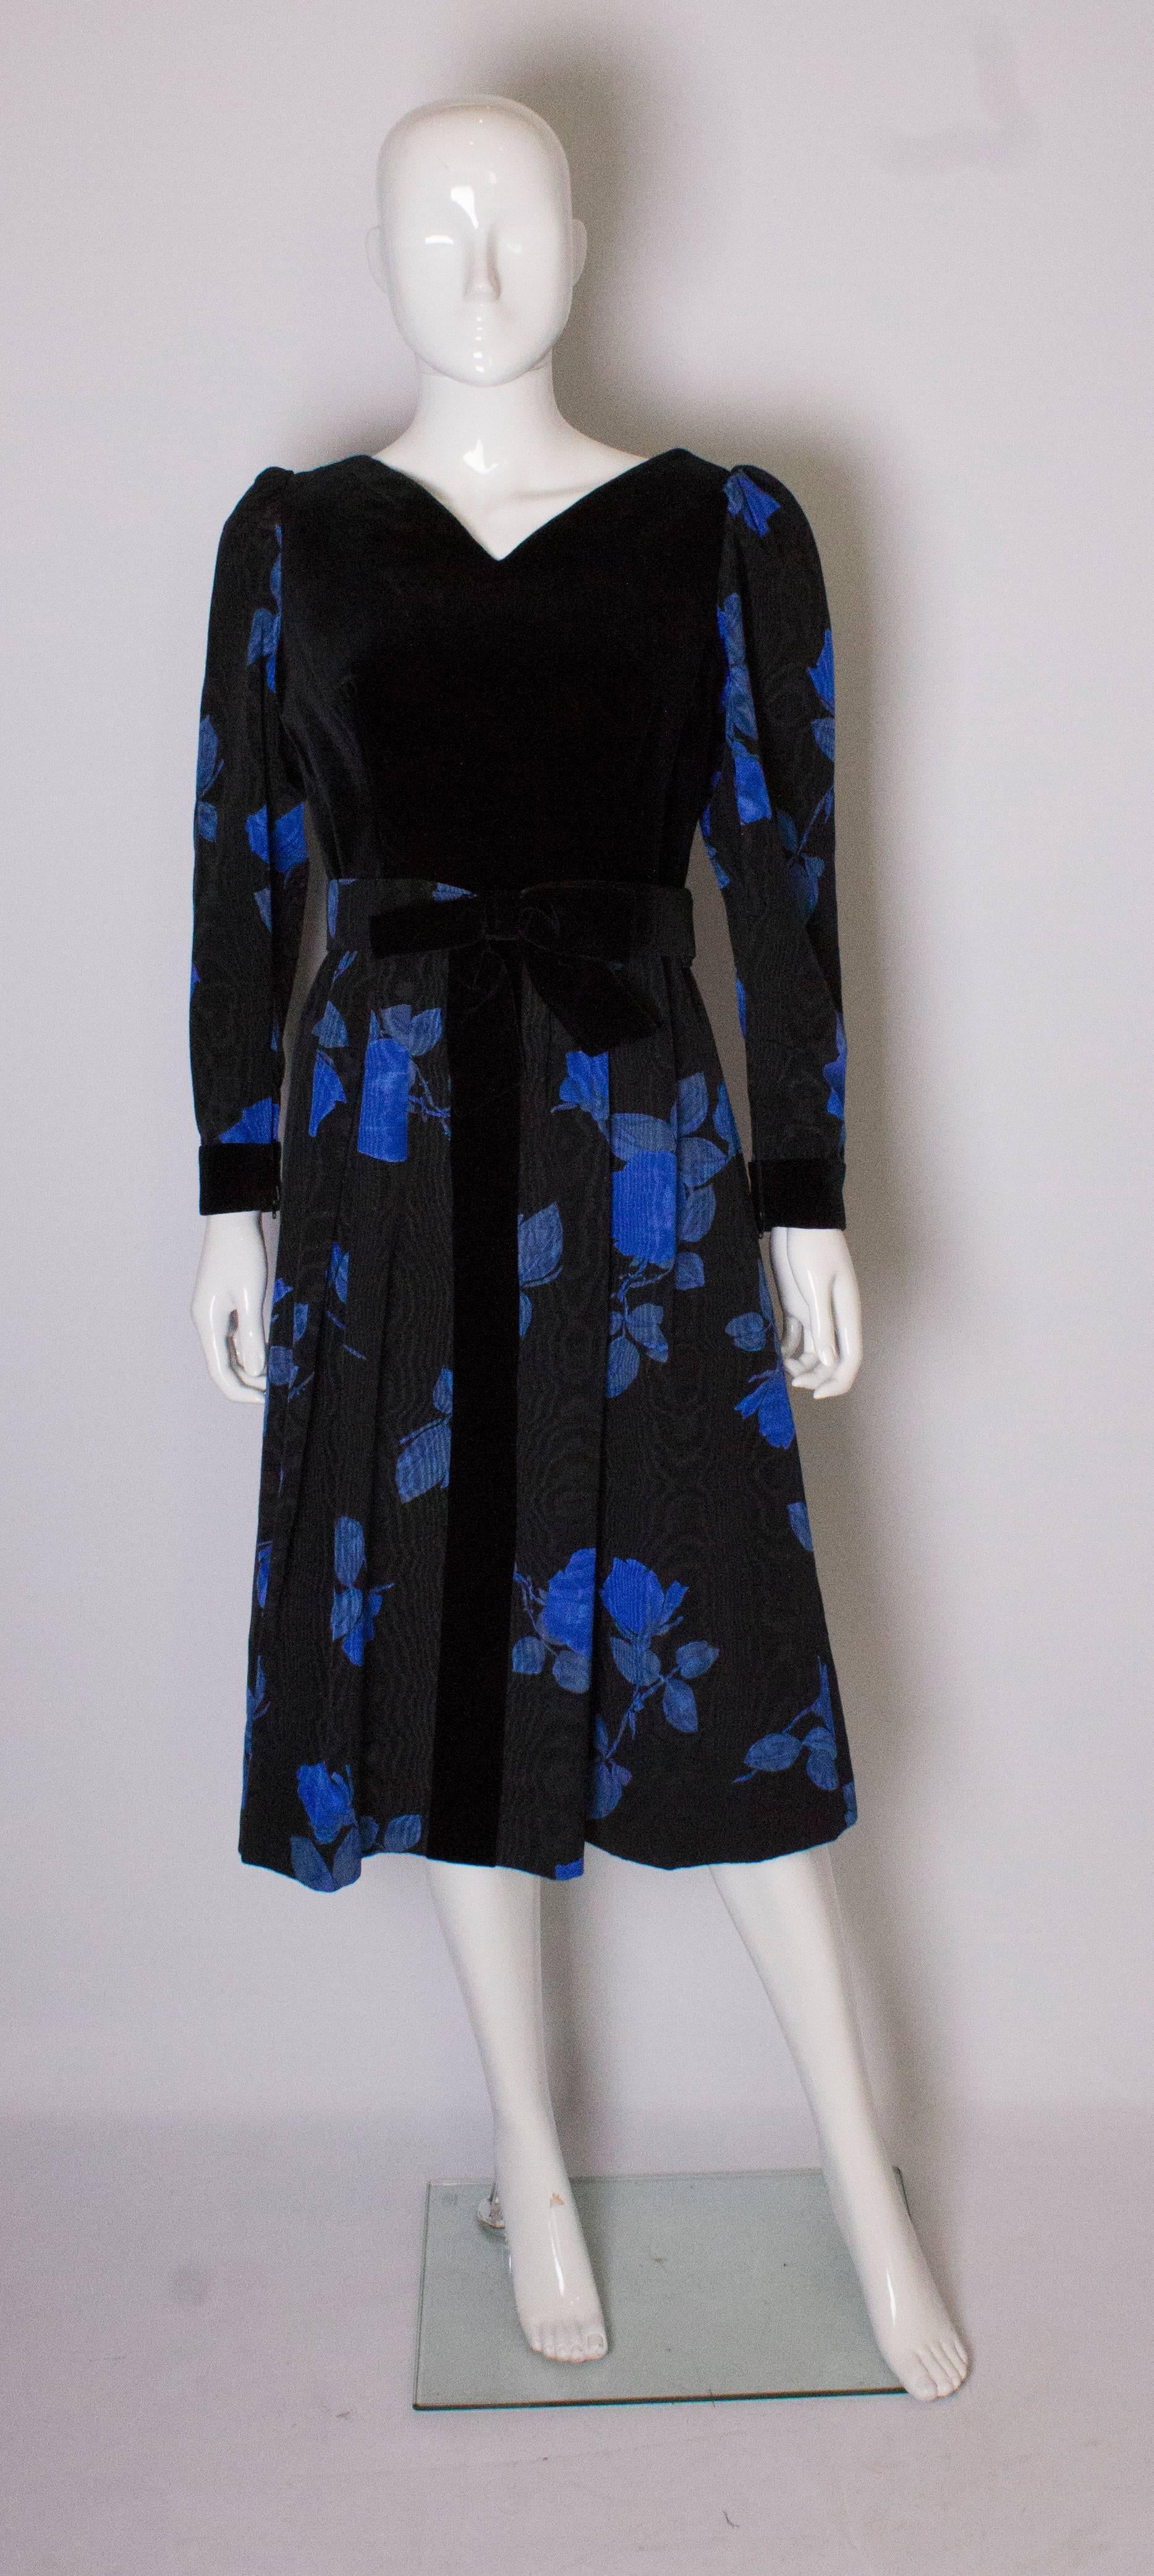 A chic vintage cocktail /dinner dress by Donald Campbell. The dress has a velvet body , with a v neckline front and back. It has a central back zip, and central velvet strip down the front. The skirt is moire silk and fully lined. It has elbow